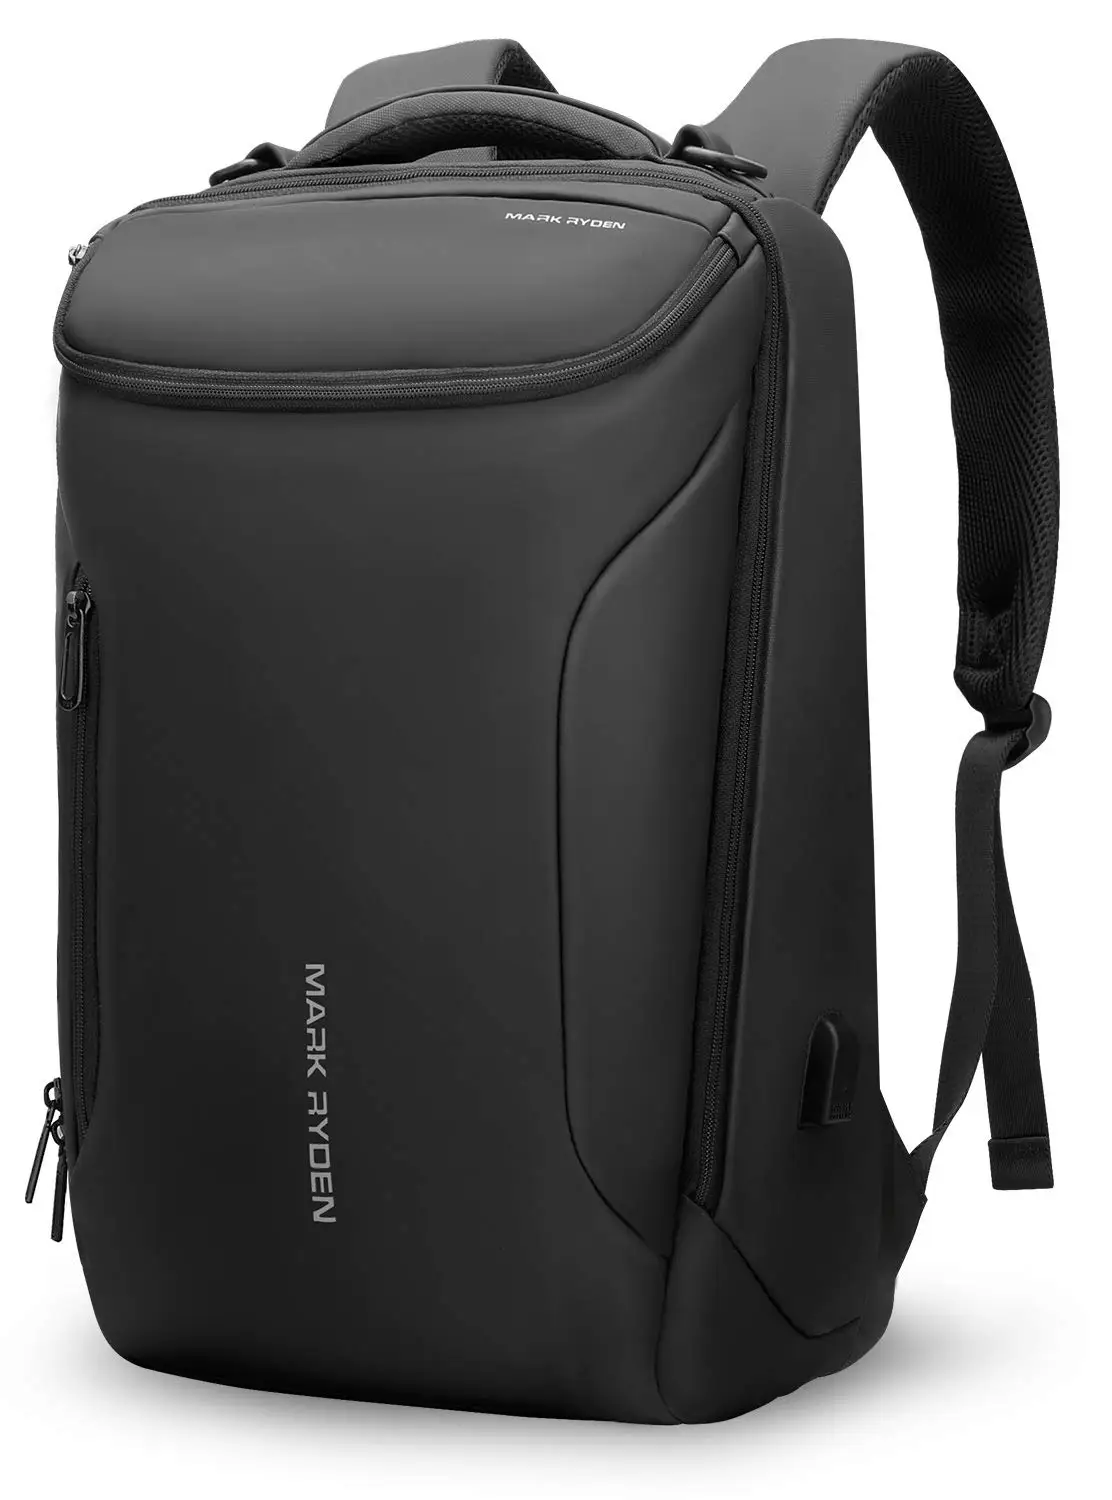 Business Backpack,Waterproof bag for Travel Flight Fits 17.3Inch Laptop With USB Charging Plug